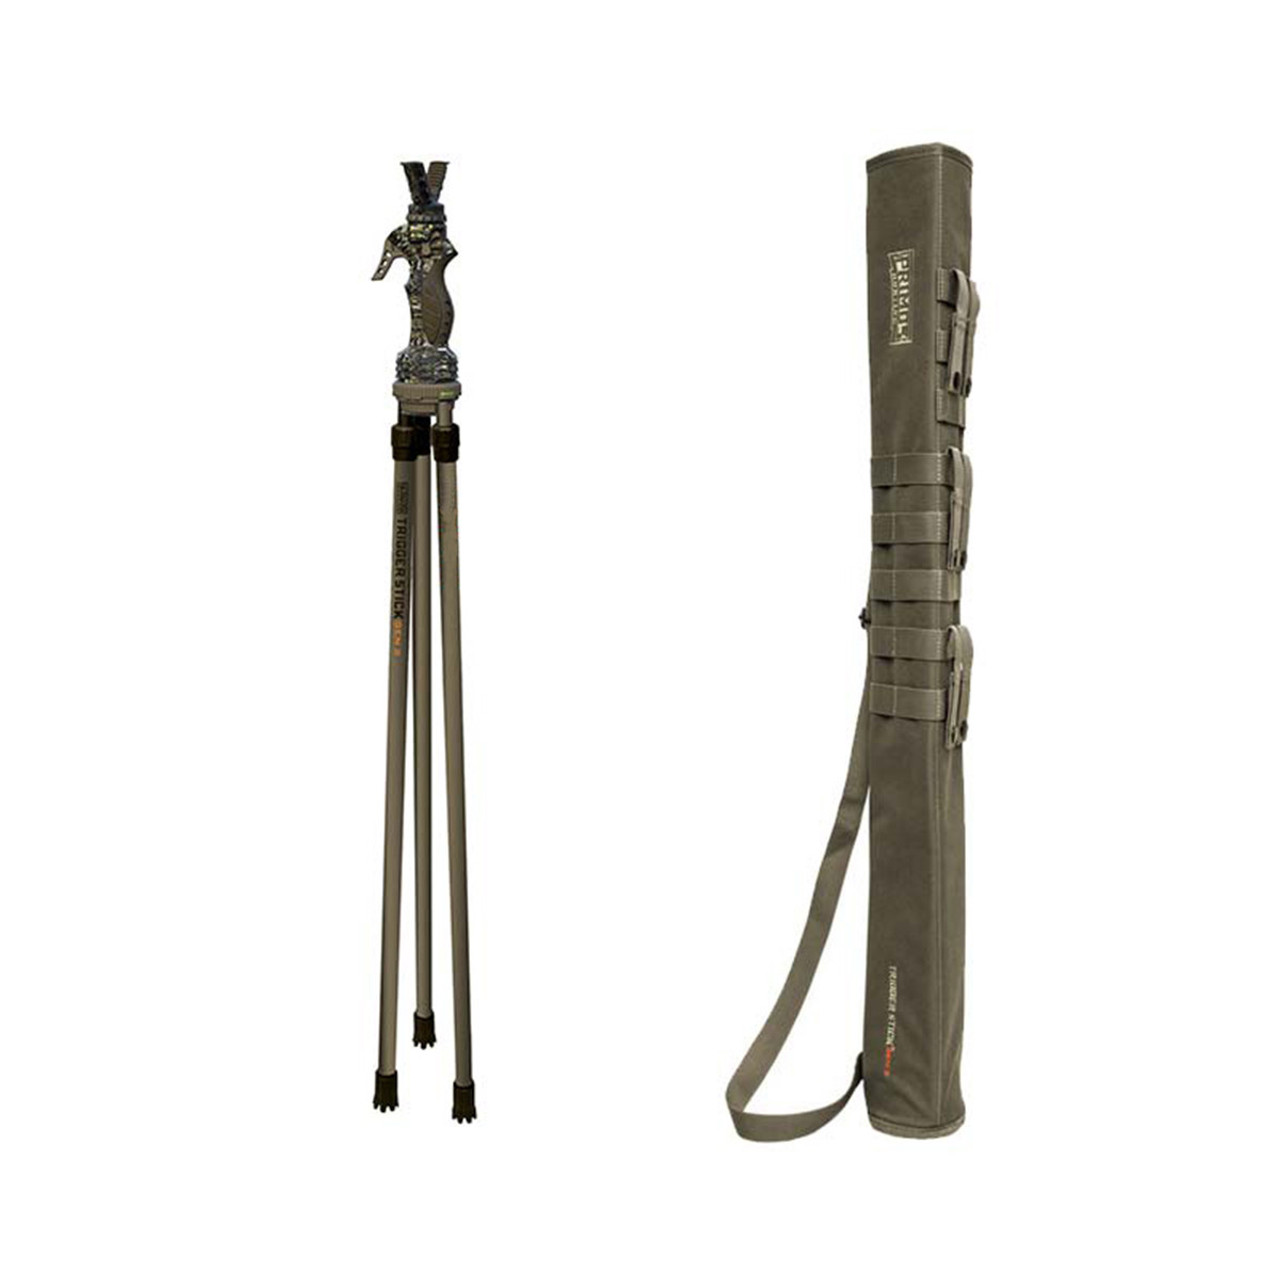 Primos Tall Trigger Stick Gen 3 Tripod with Scabbard | Rogers 